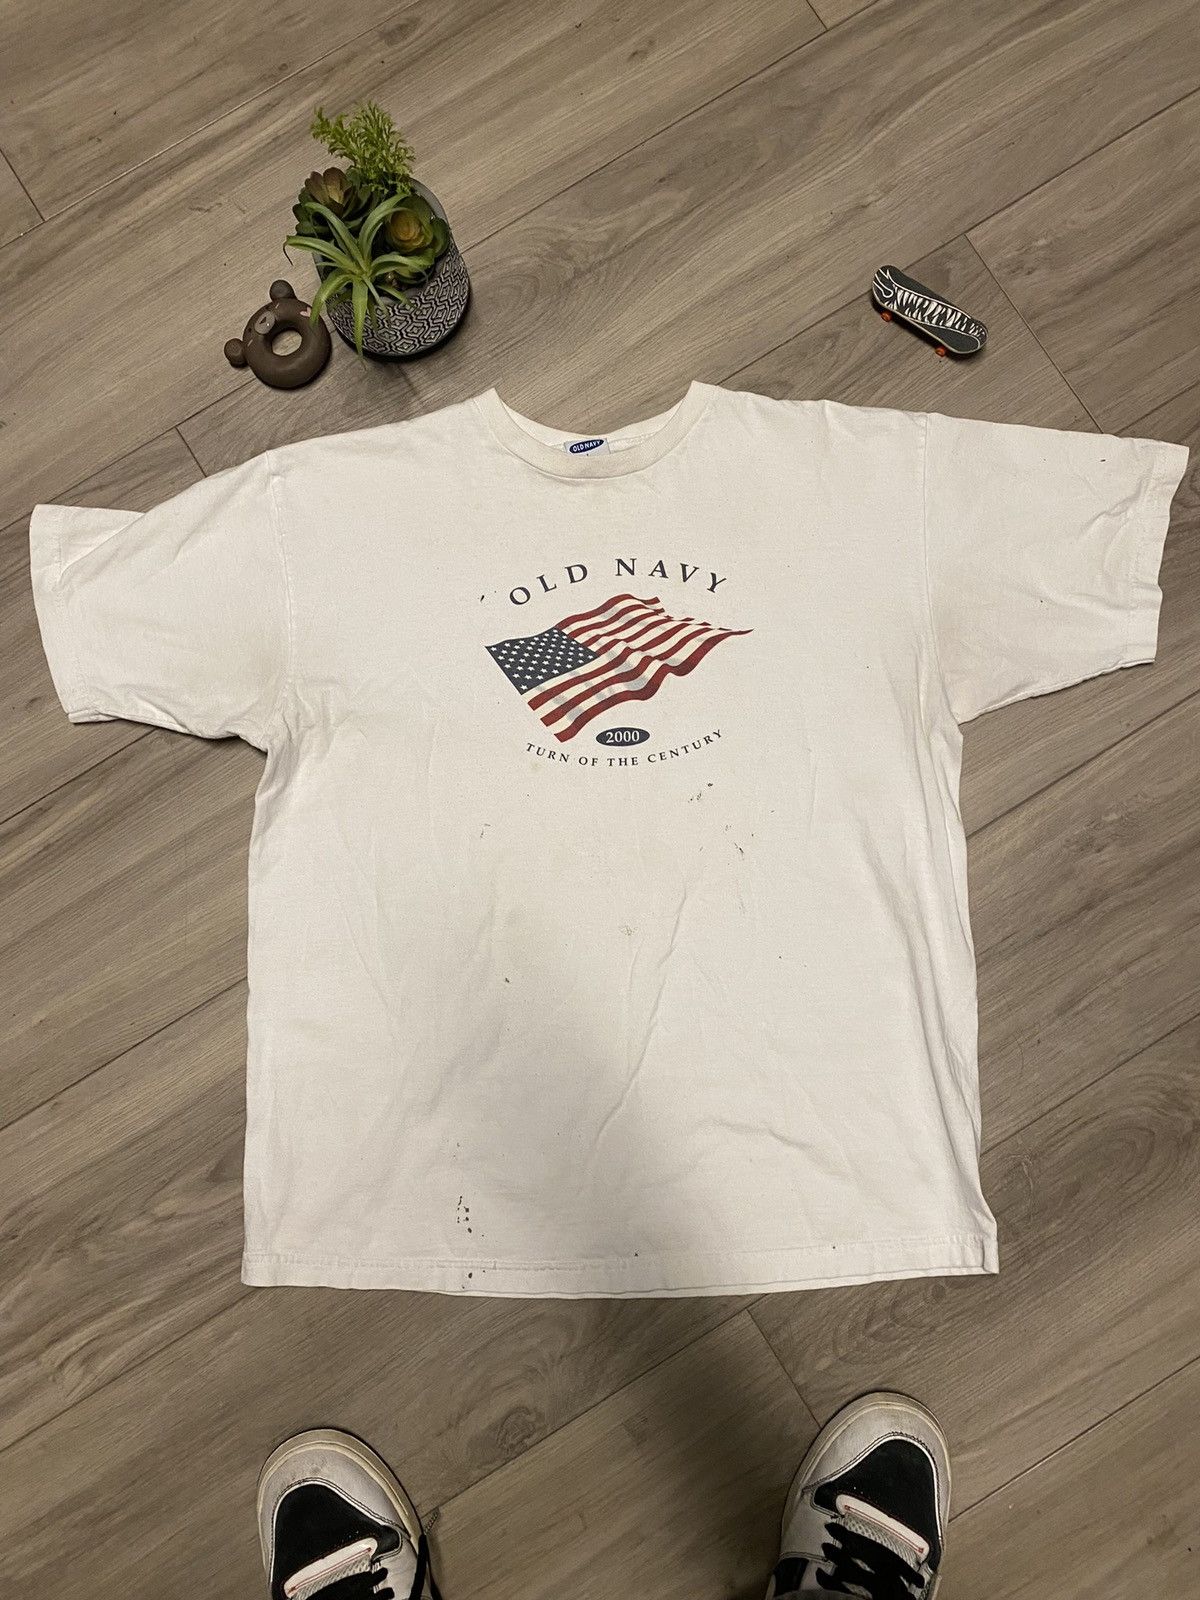 4th of July 🤝 Old Navy t-shirts #2000s #nostalgia #Millennials